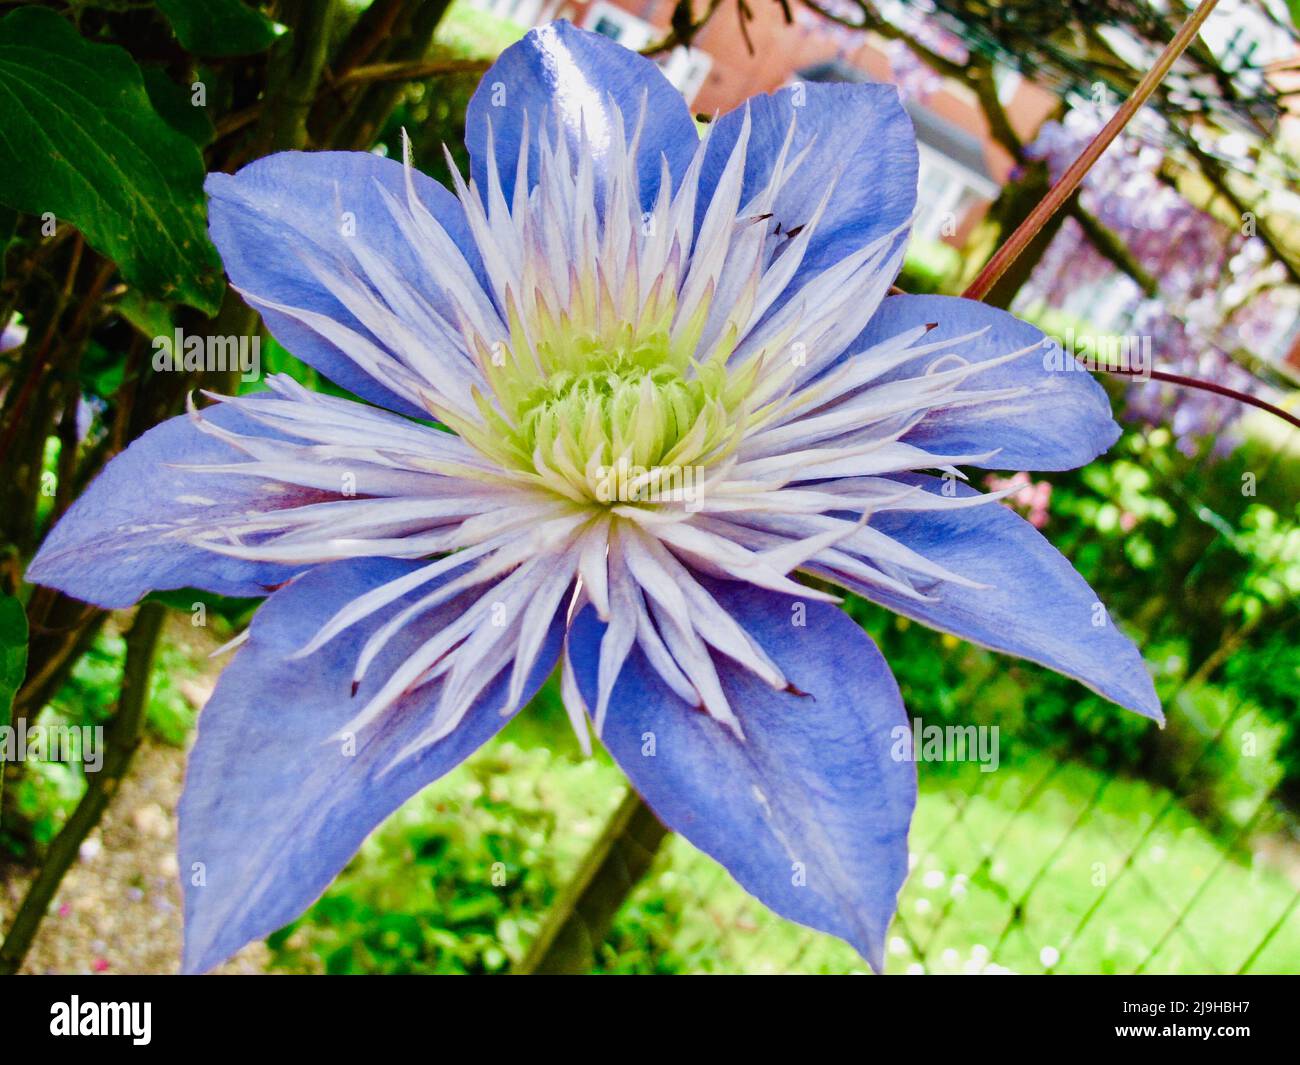 Crystal fountain clematis purple Stock Photo - Alamy